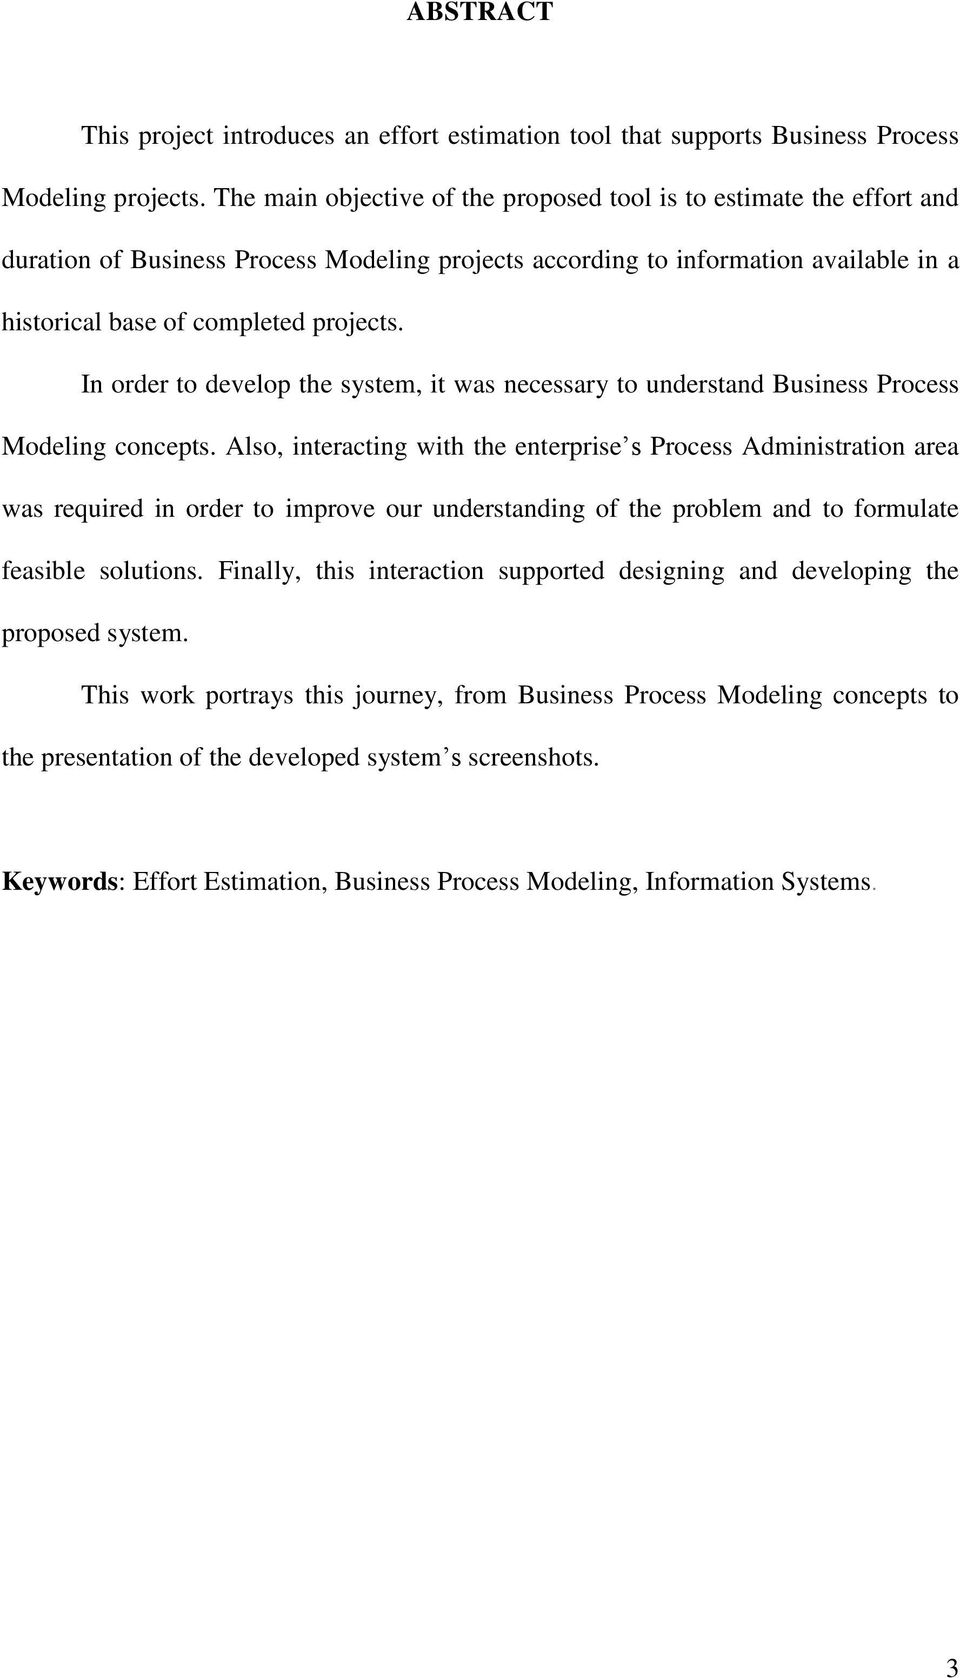 In order to develop the system, it was necessary to understand Business Process Modeling concepts.